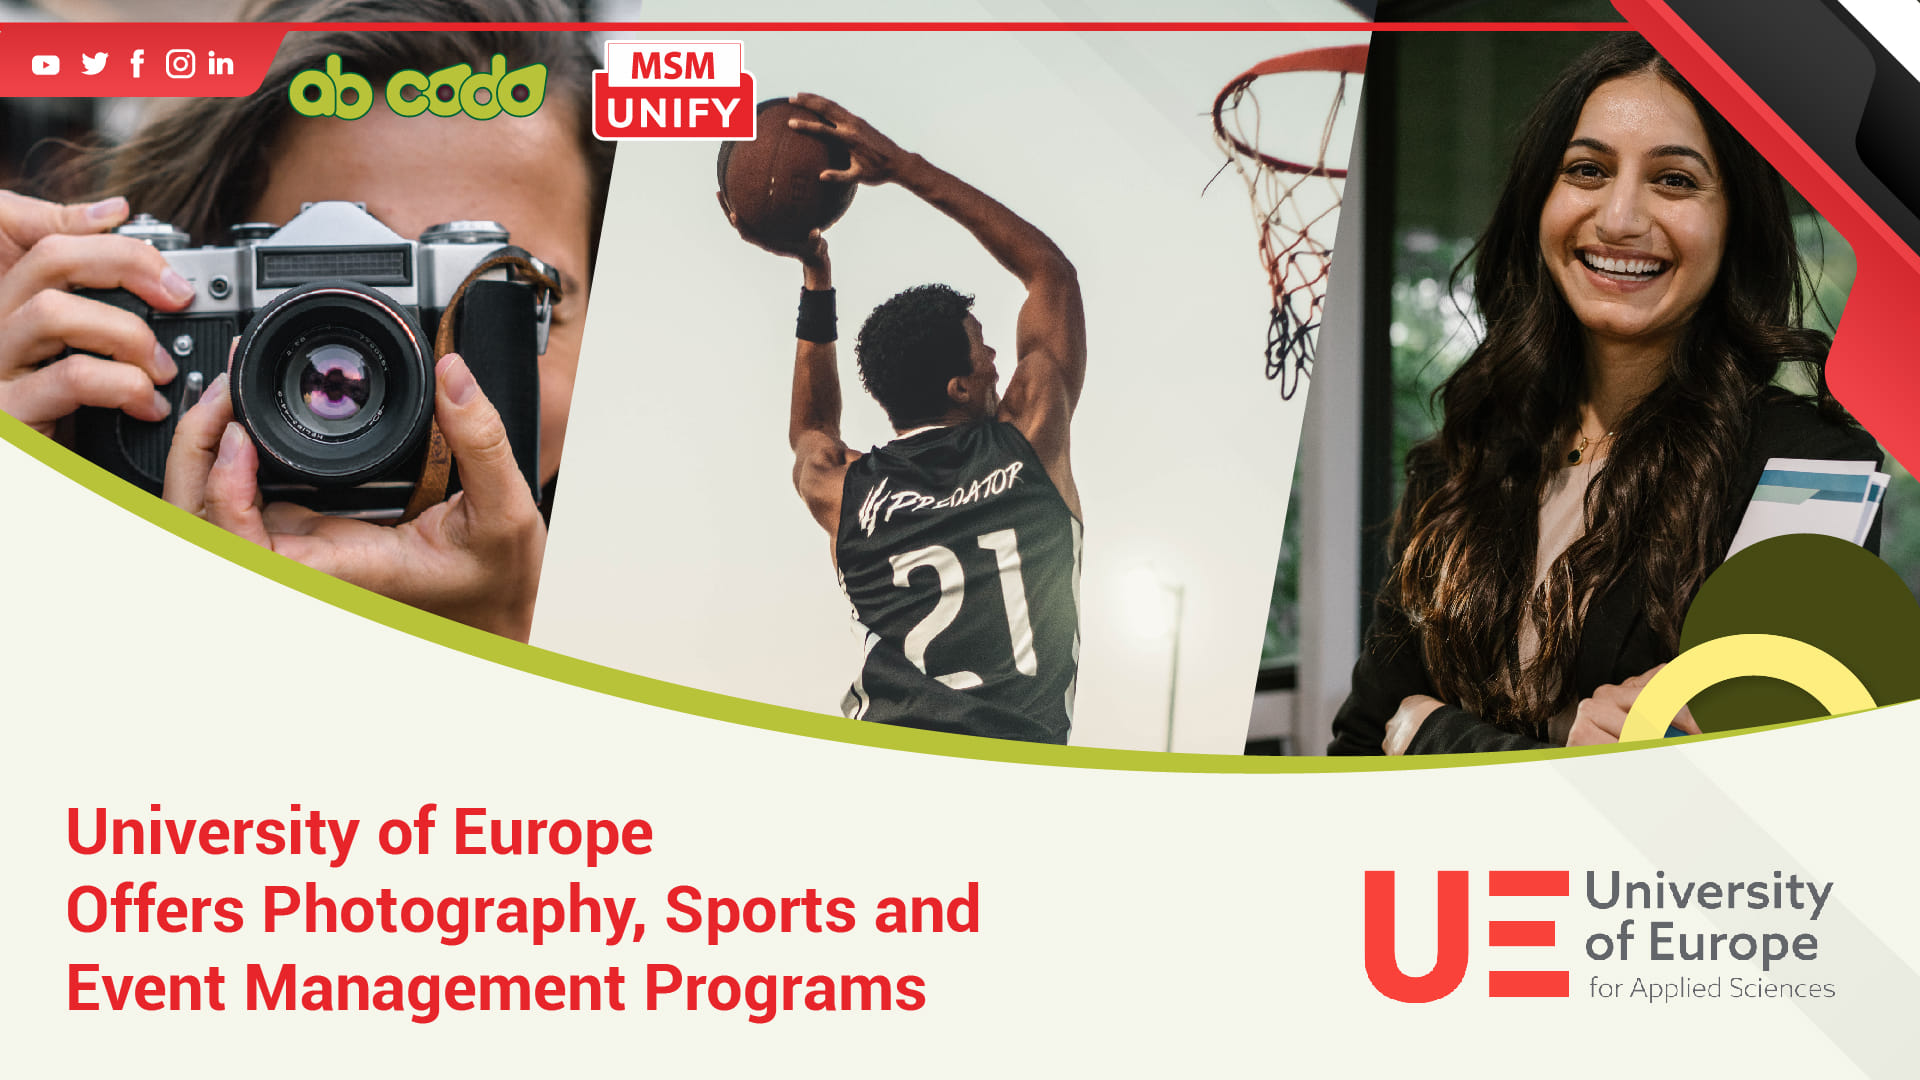 photography, sports and event management are new programs in university of europe